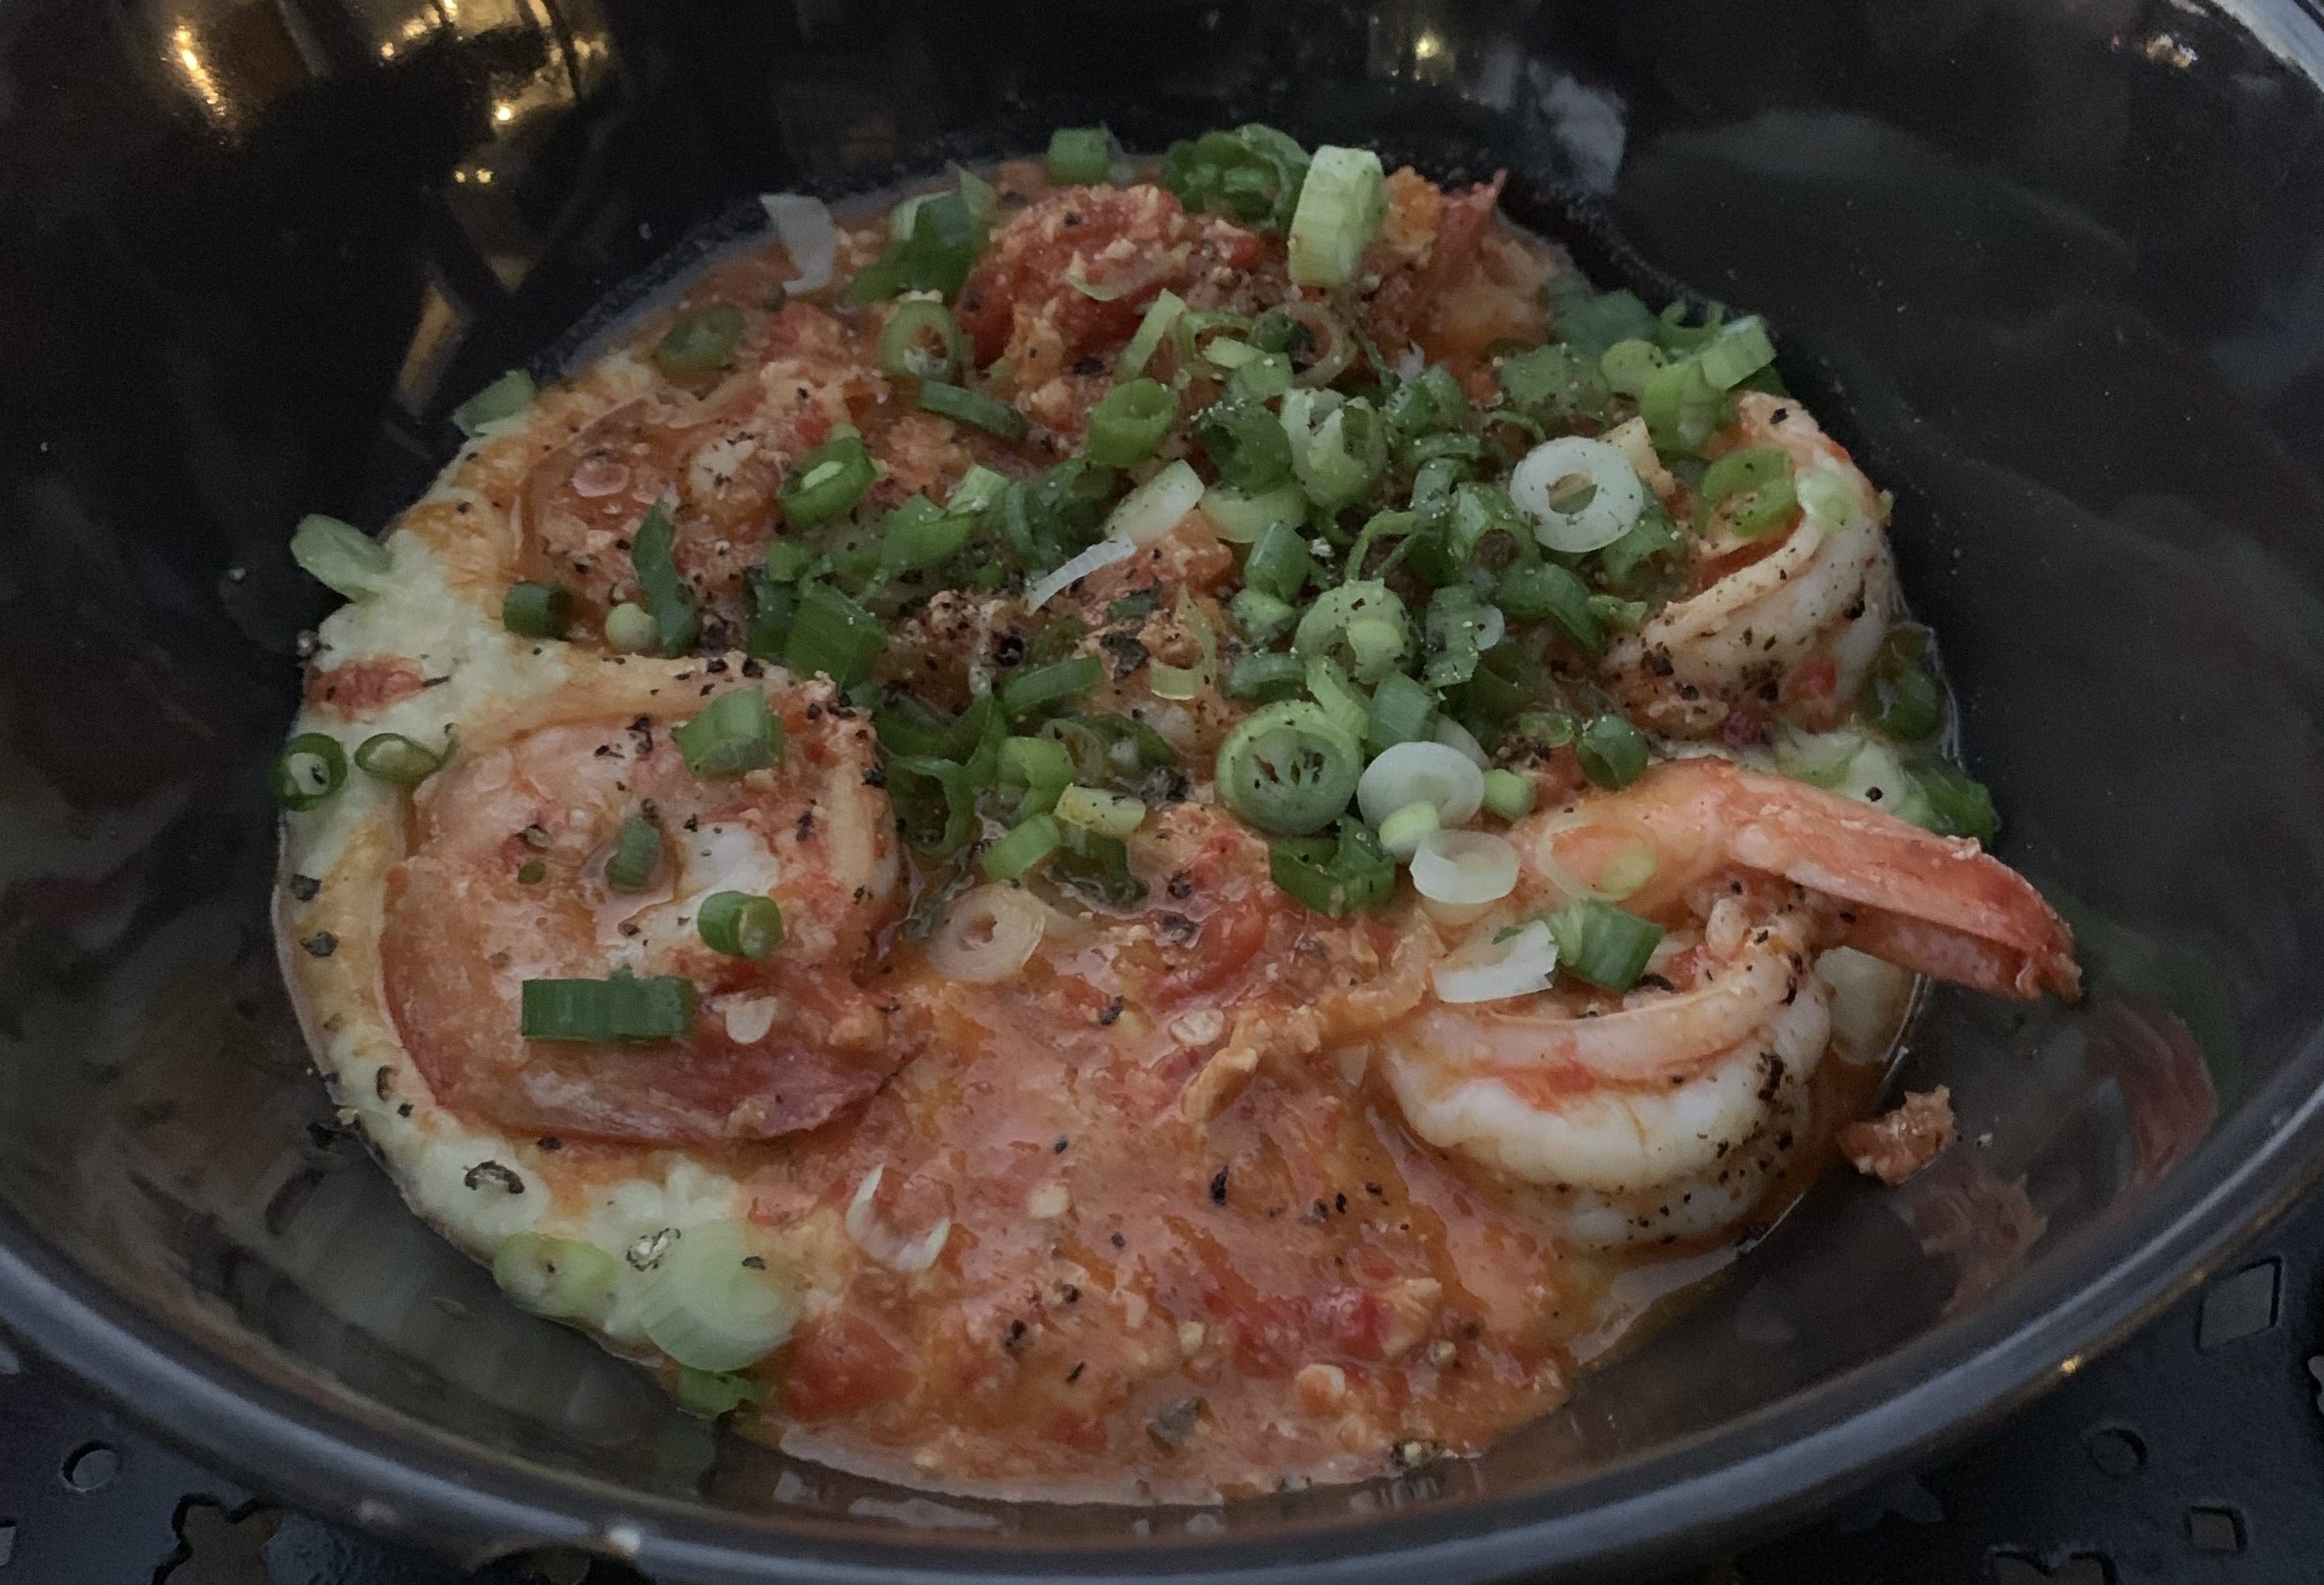 Shrimp and Grits at Olmo